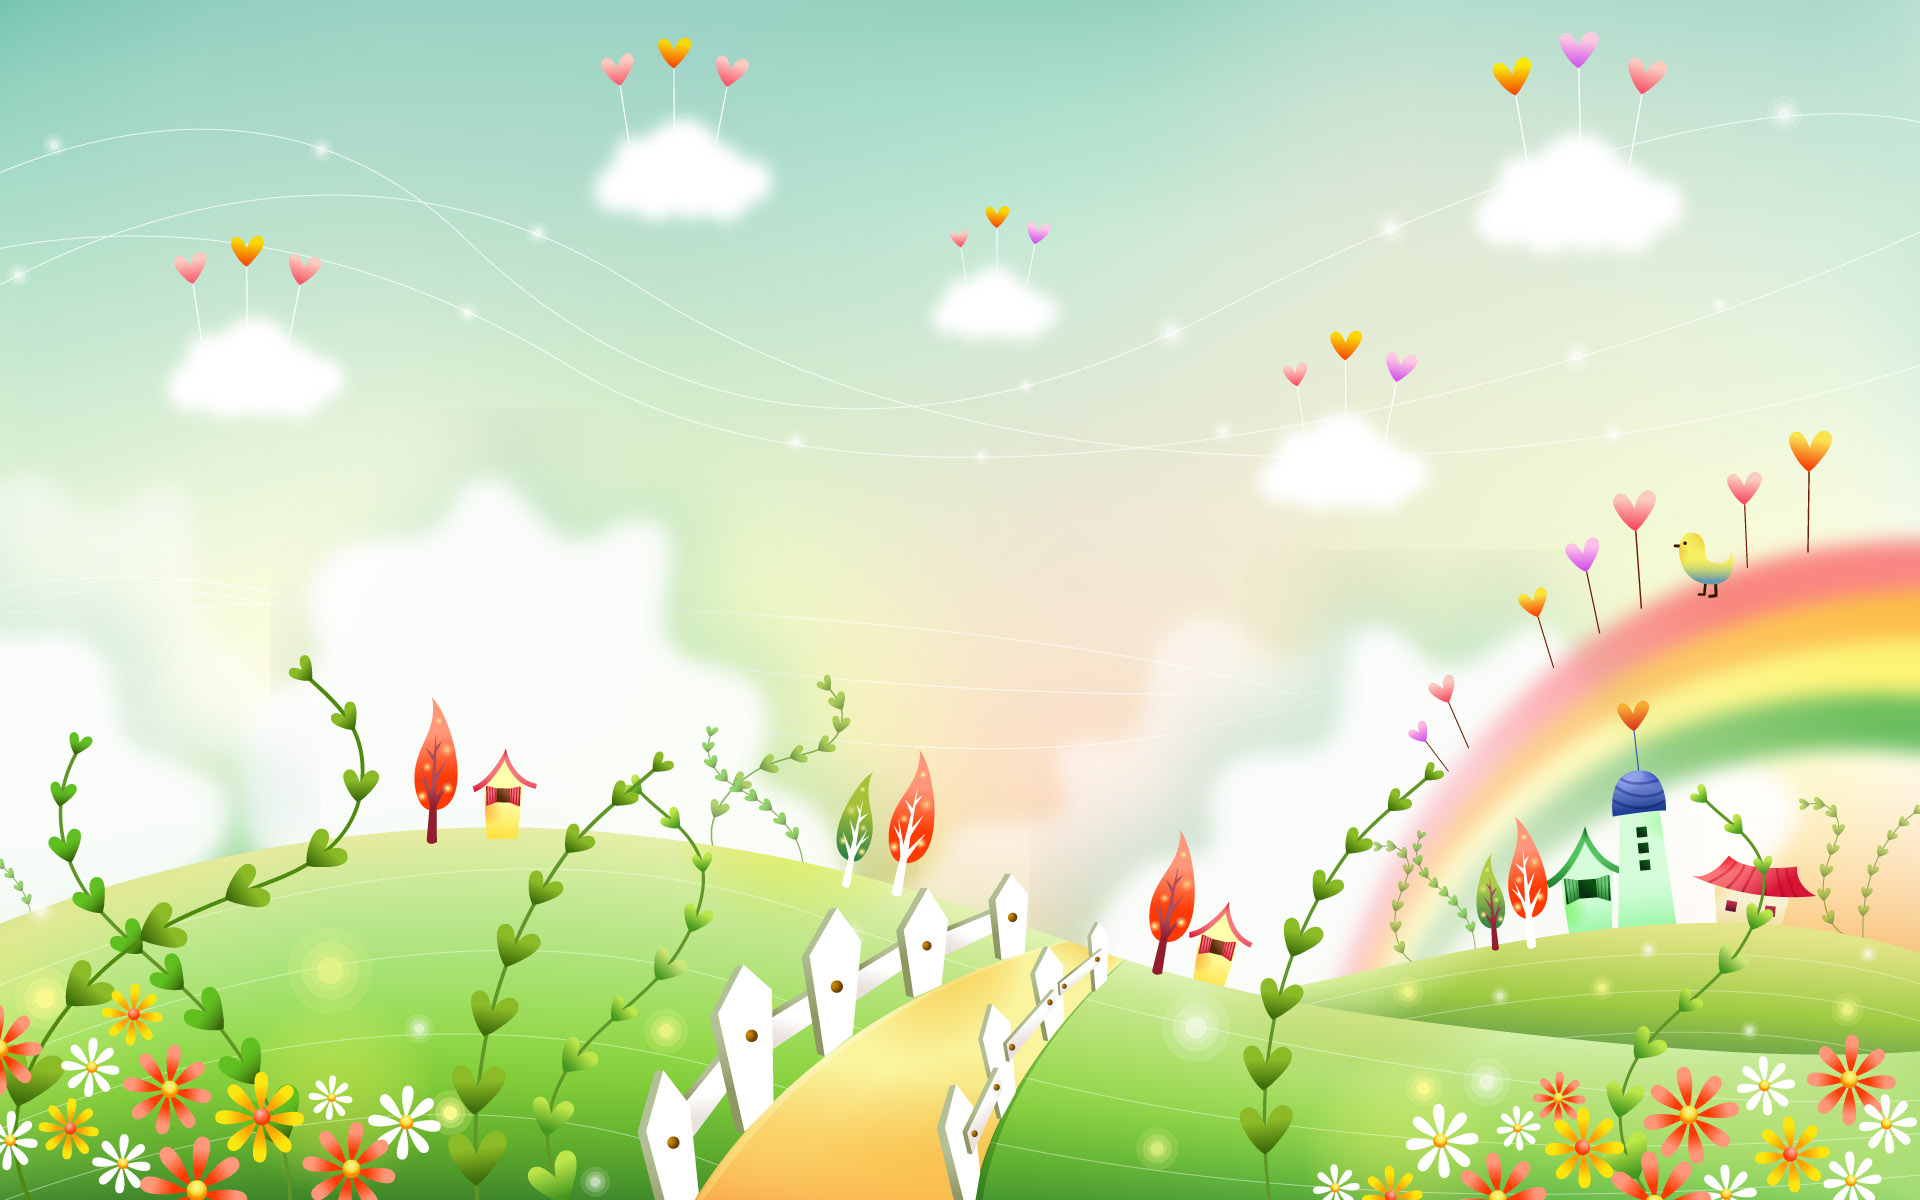 Background clipart 2